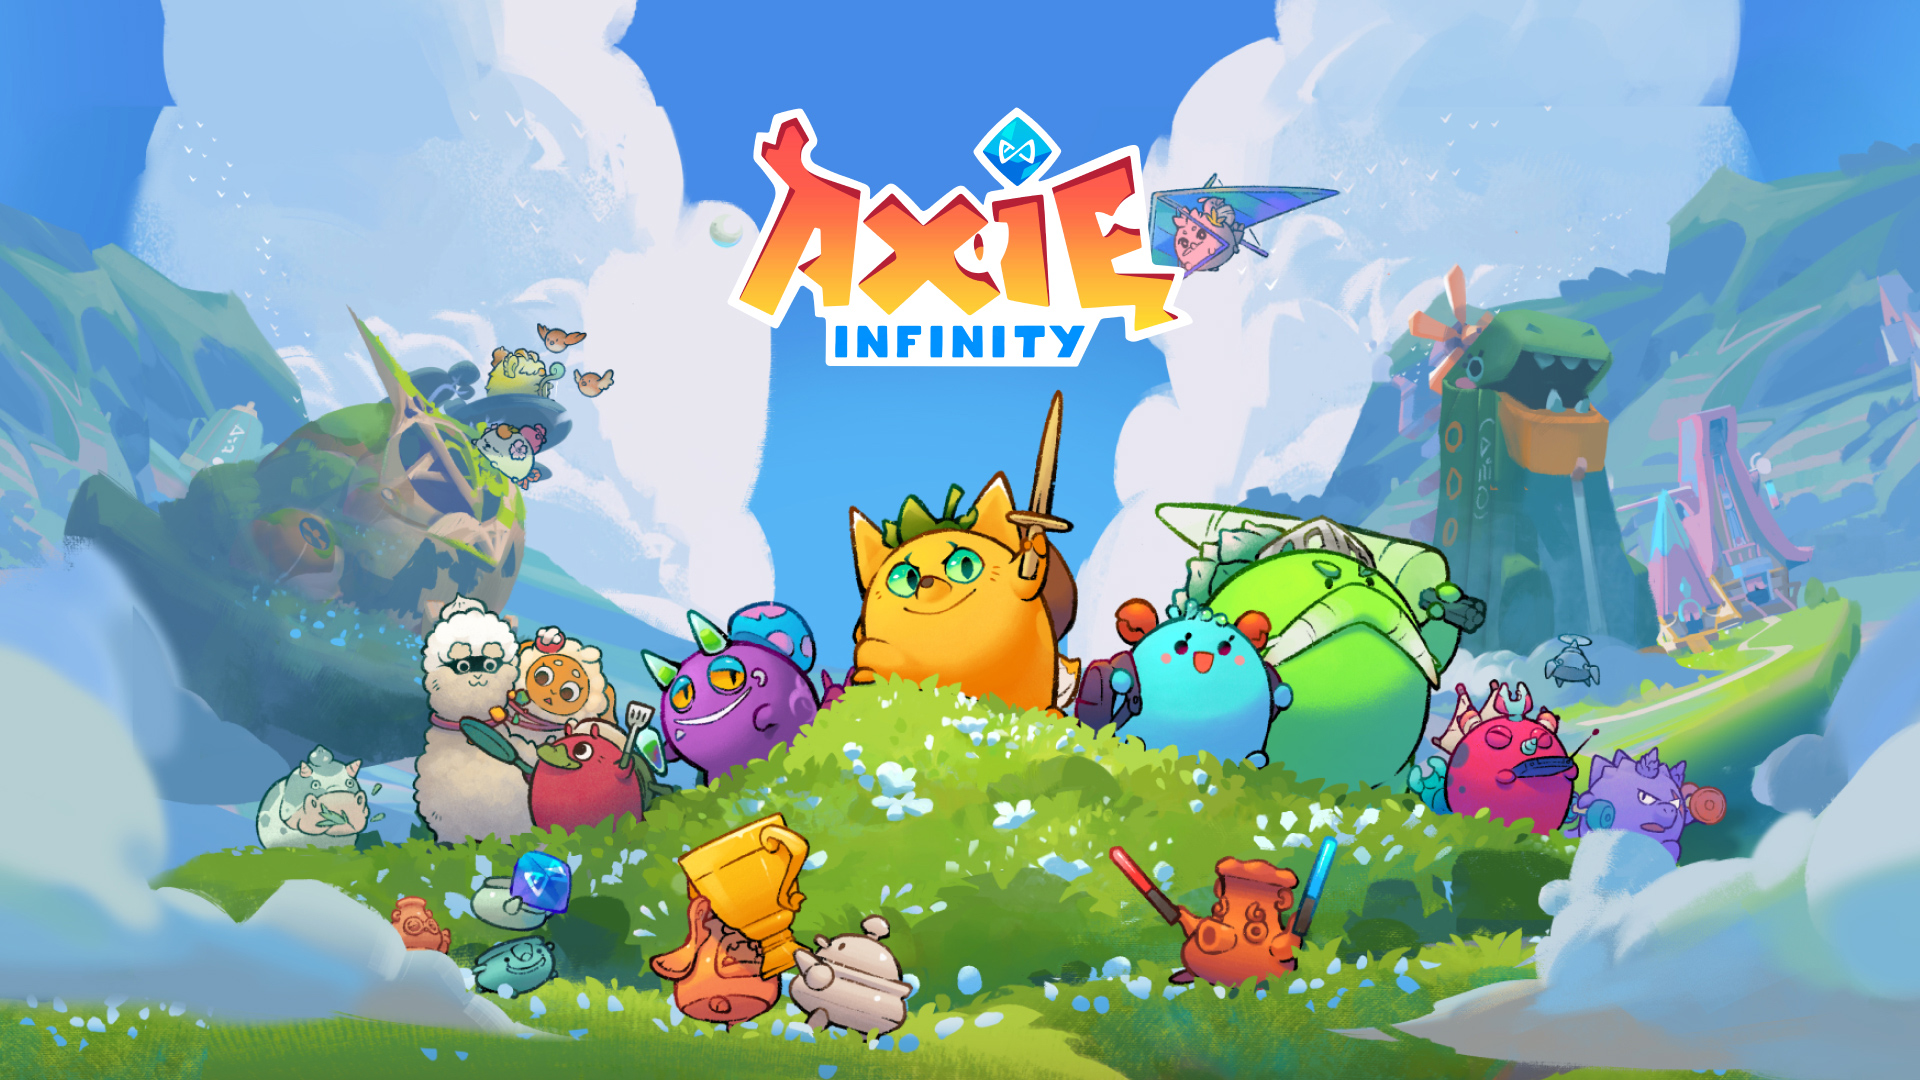 Axie Infinity is an NFT game filled with cute, formidable creatures known as Axies.